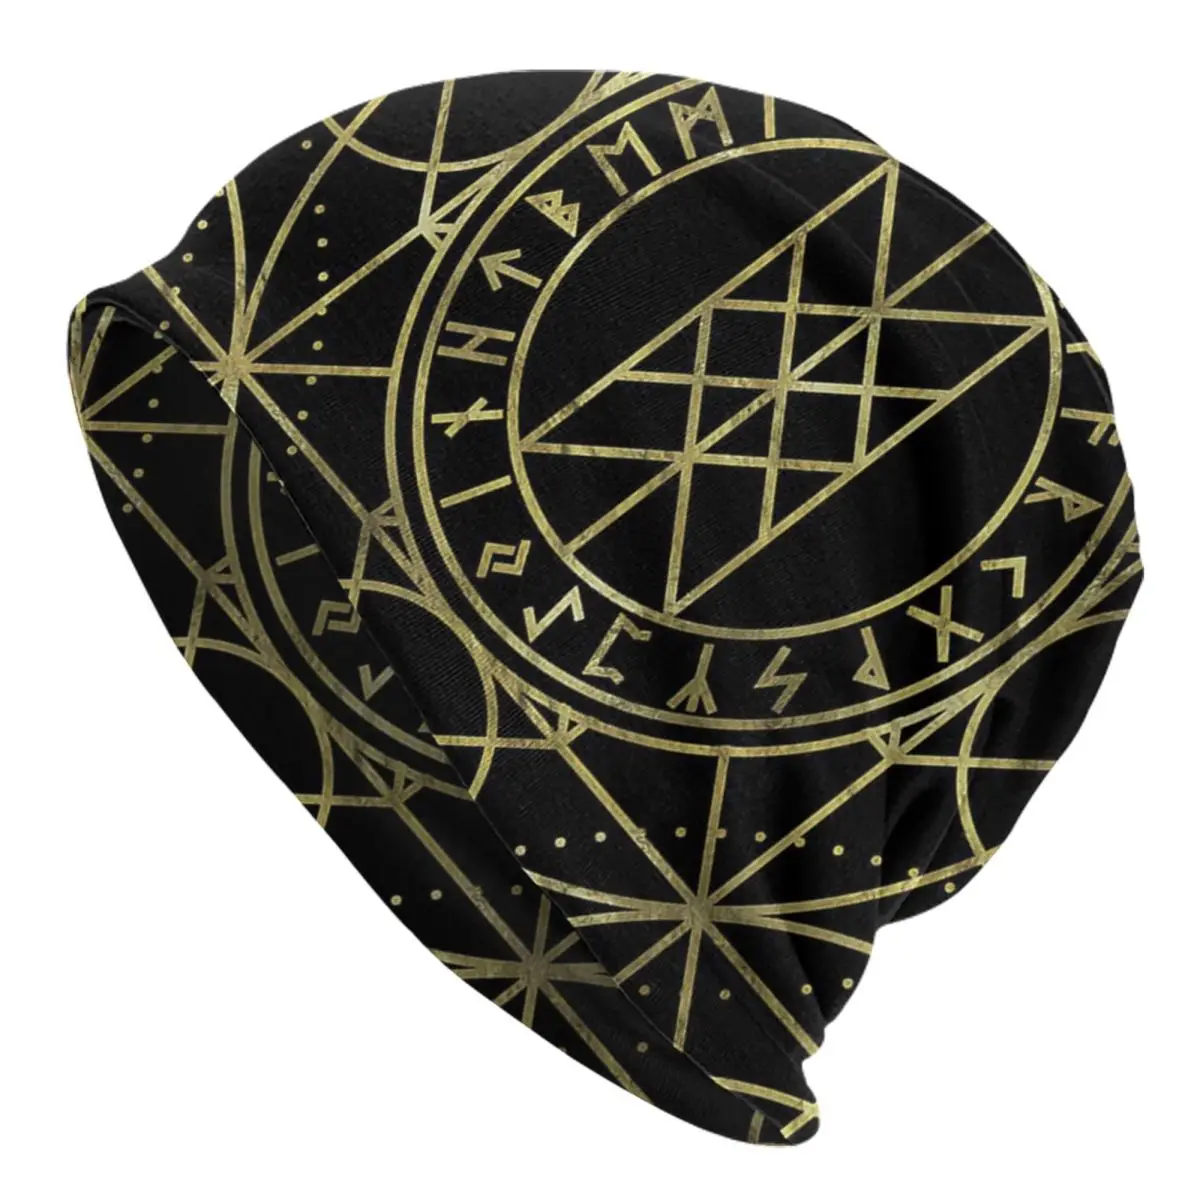 Web Of Wyrd - The Matrix Of Fate Adult Men's Women's Knit Hat Keep warm winter knitted hat